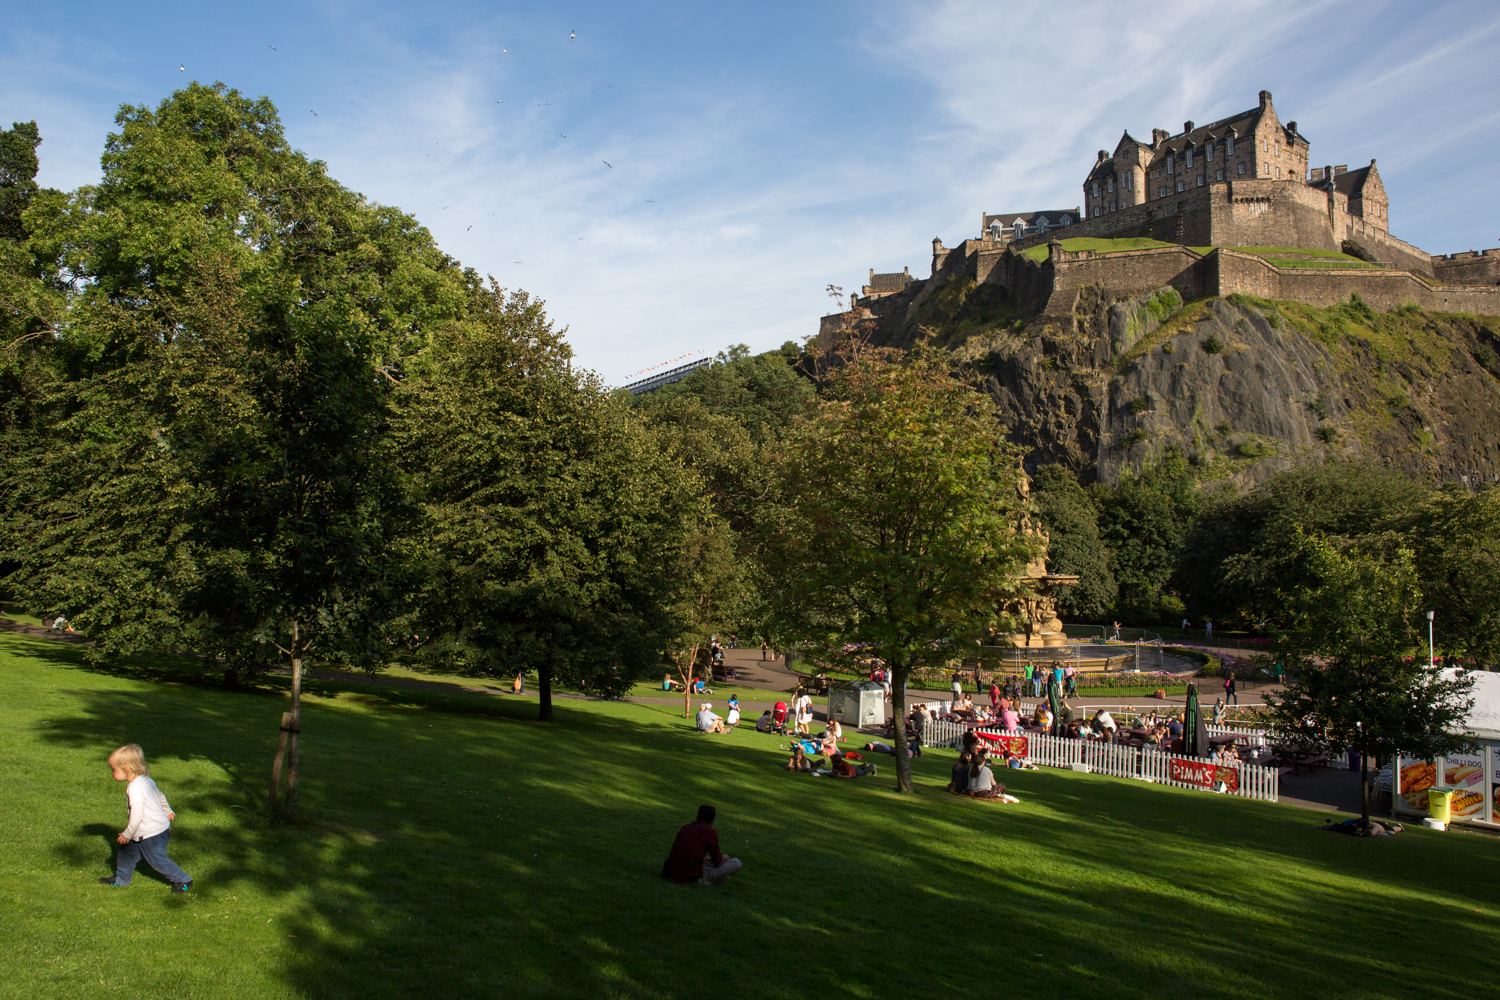  Scotland's Edinburgh Castle acts as a backdrop to the city's Princes Street Gardens. A young child walks up the hill. 